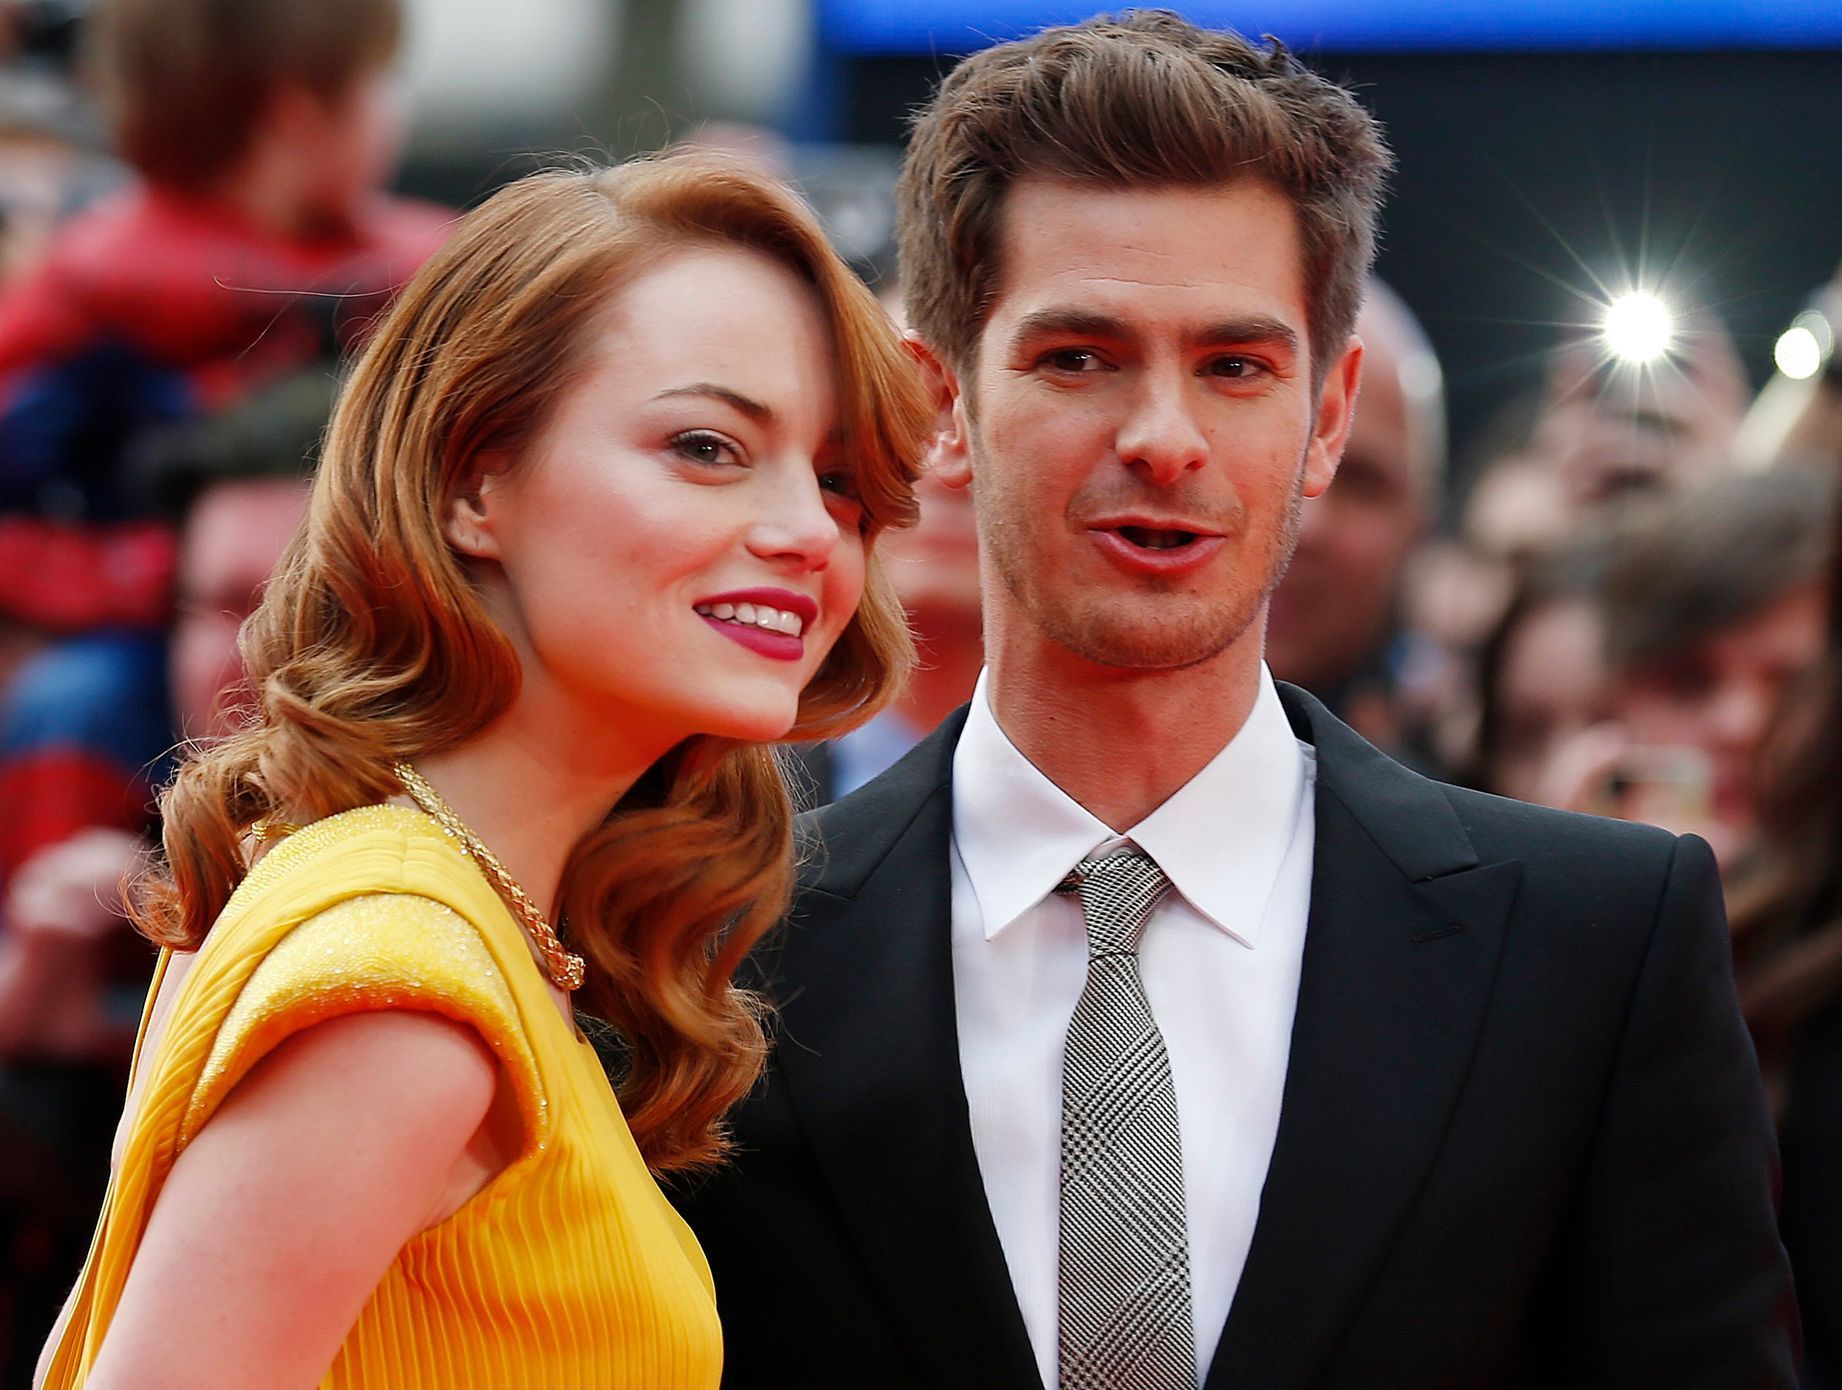 Actors Emma Stone and Andrew Garfield arrive at the world premiere of The Amazing Spiderman 2 in central London